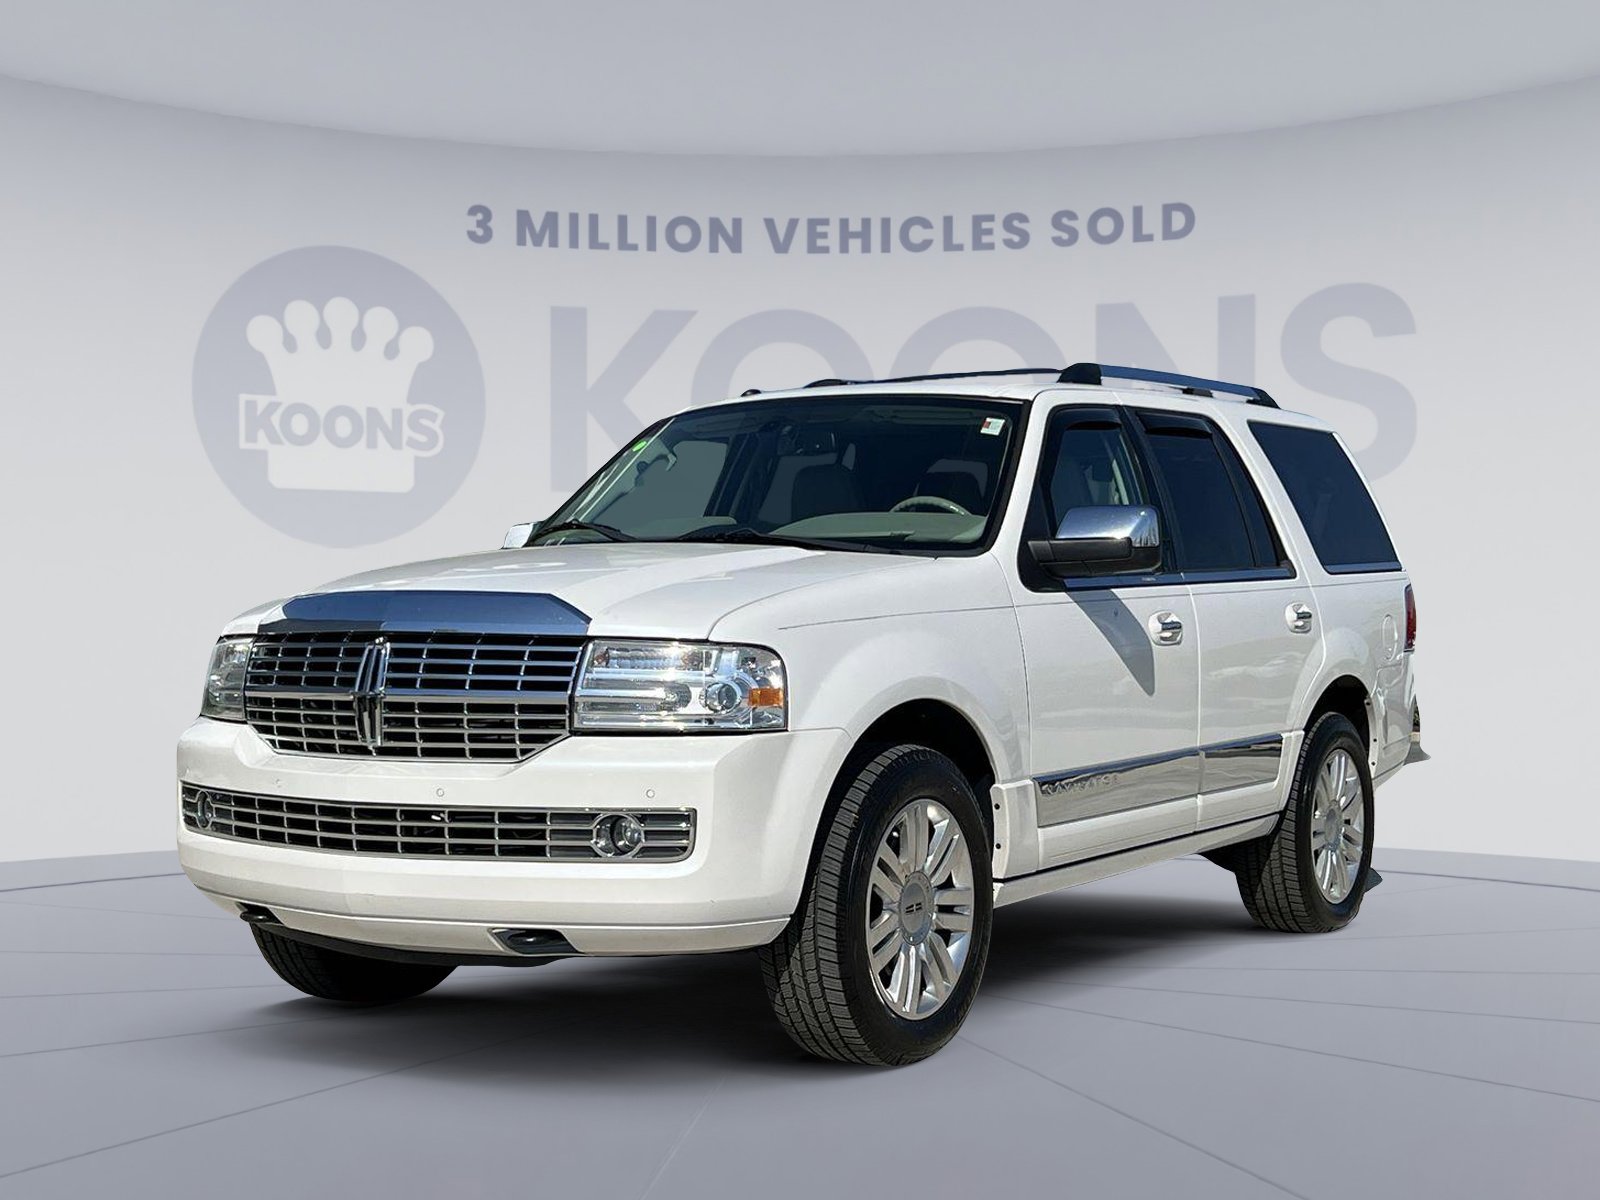 Used 2014 Lincoln Navigator for Sale Right Now - Autotrader